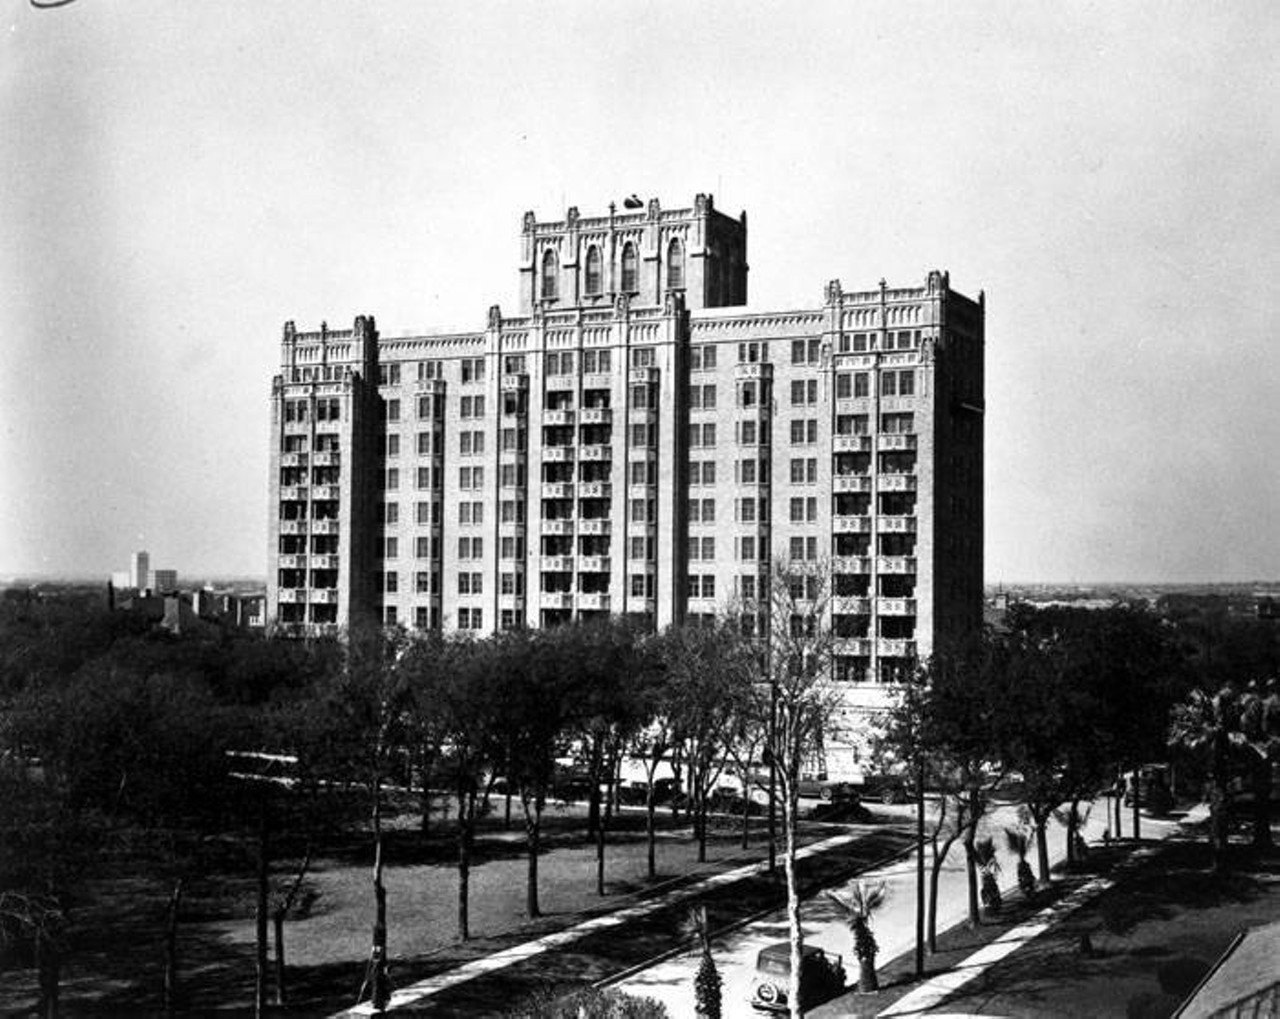 1930, Photo of the Aurora Apartments taken shortly after completion.
UTSA Special Collections